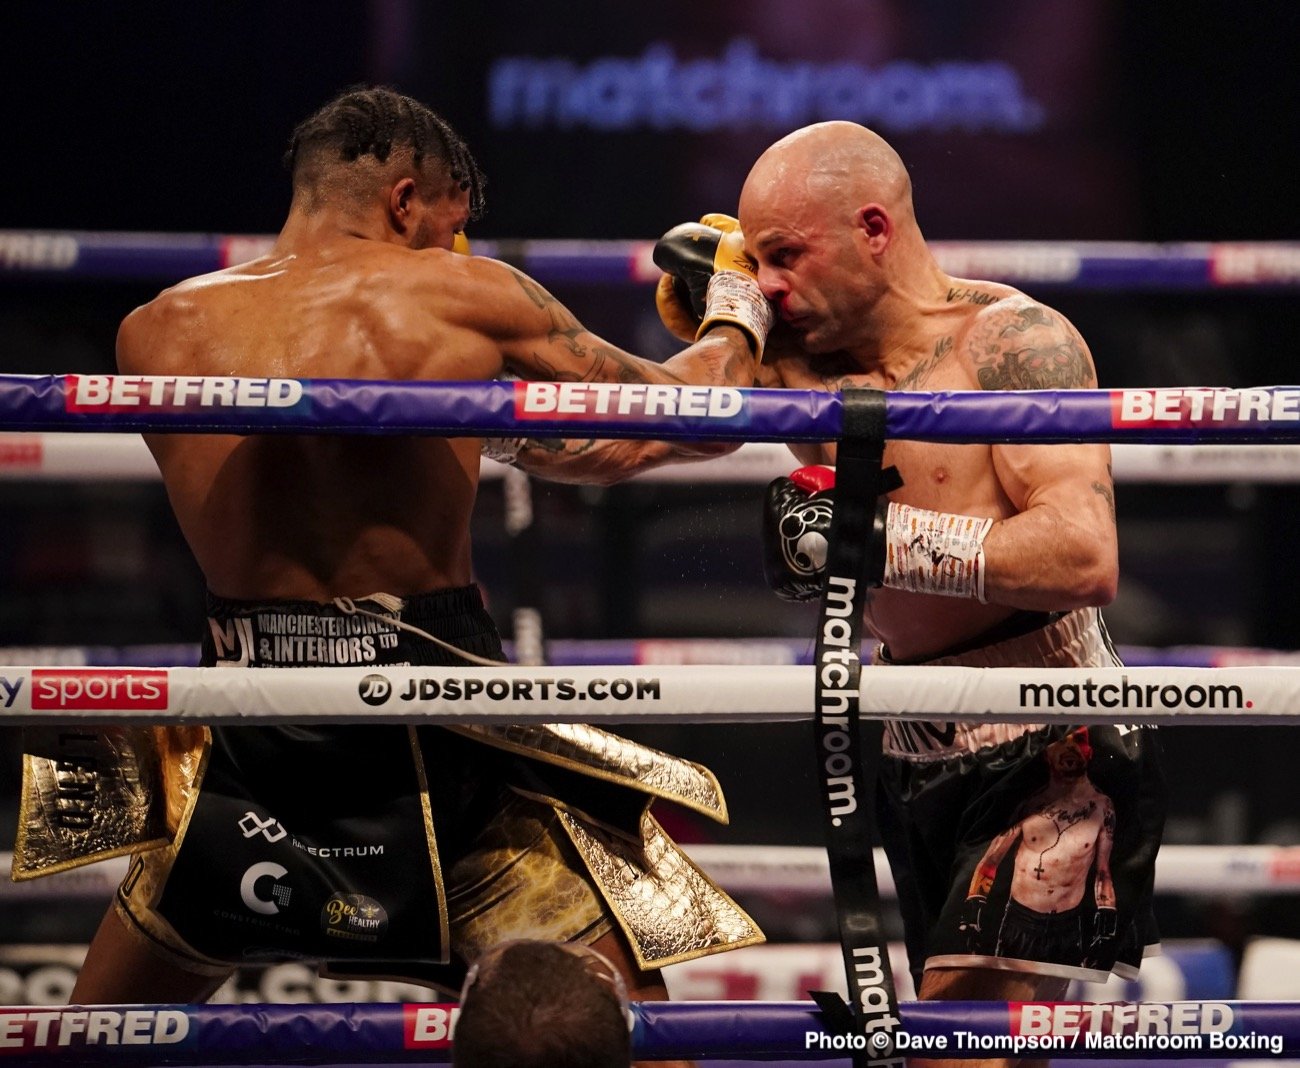 Seriously Bad Scoring Tainted A Dramatic Night At Wembley: How Are We Going To Bring Foreign Fighters To This Country?